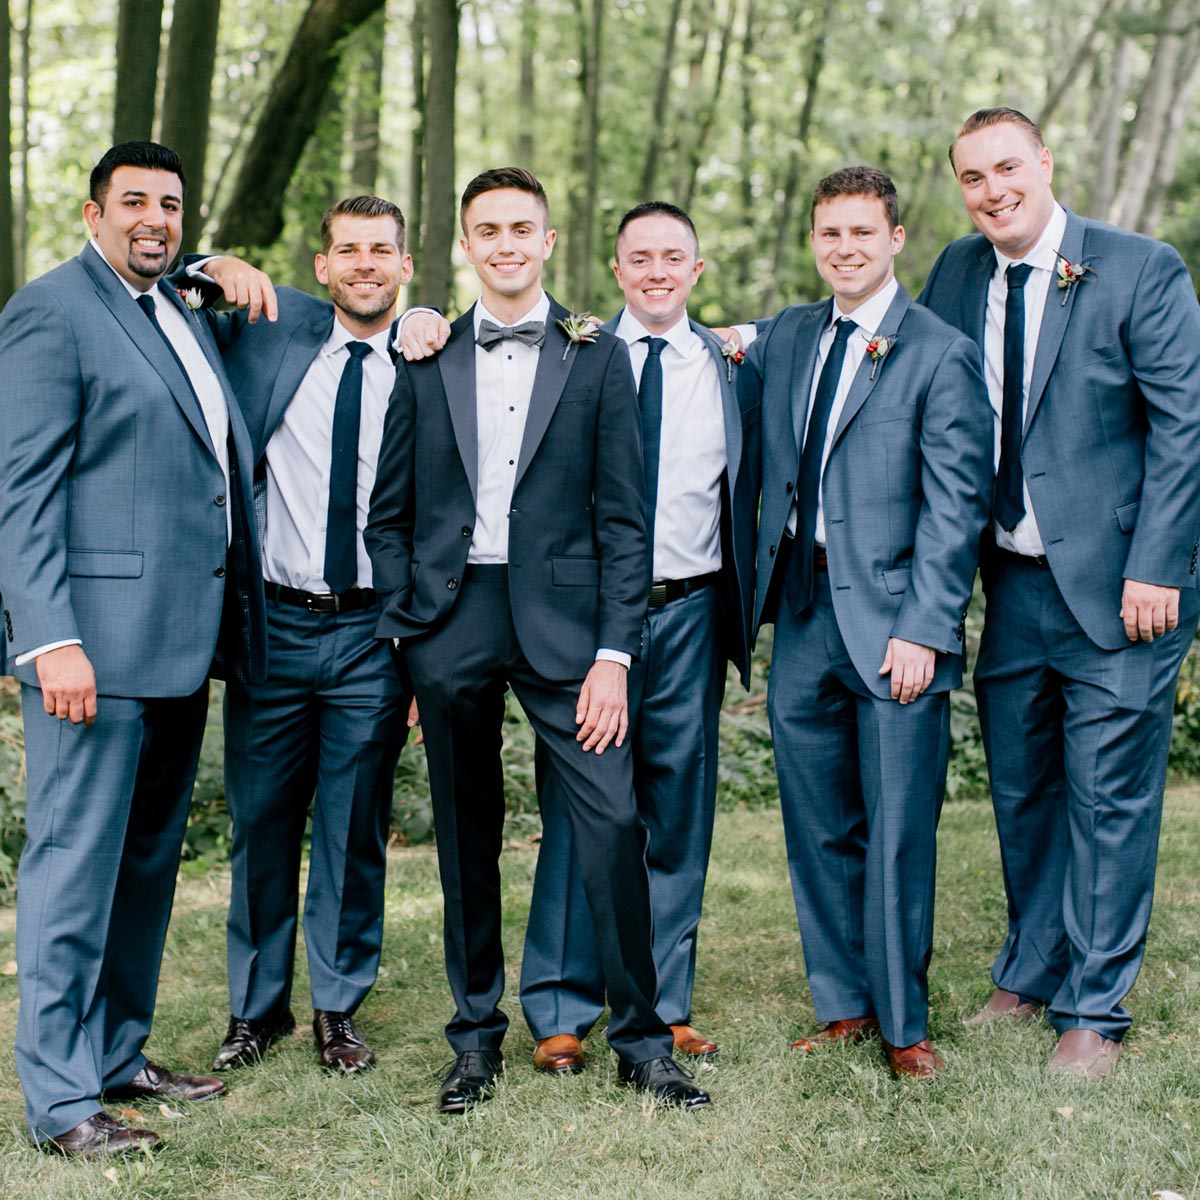 Groomsman wearing blue-gray suits standing with Tom